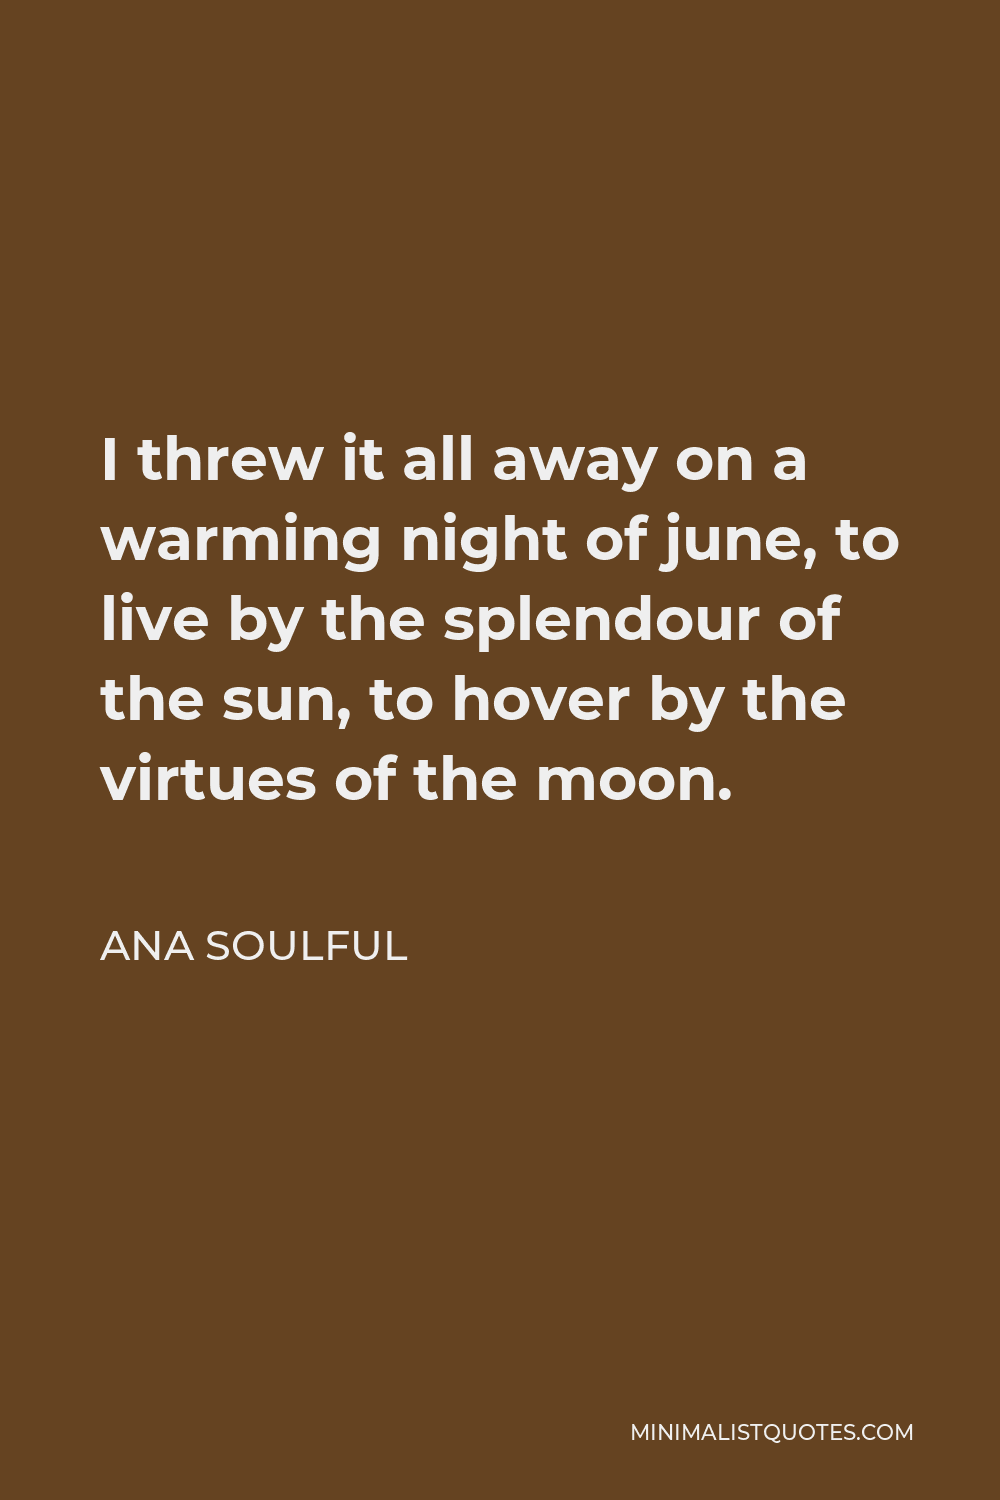 Ana Soulful Quote - I threw it all away on a warming night of june, to live by the splendour of the sun, to hover by the virtues of the moon.